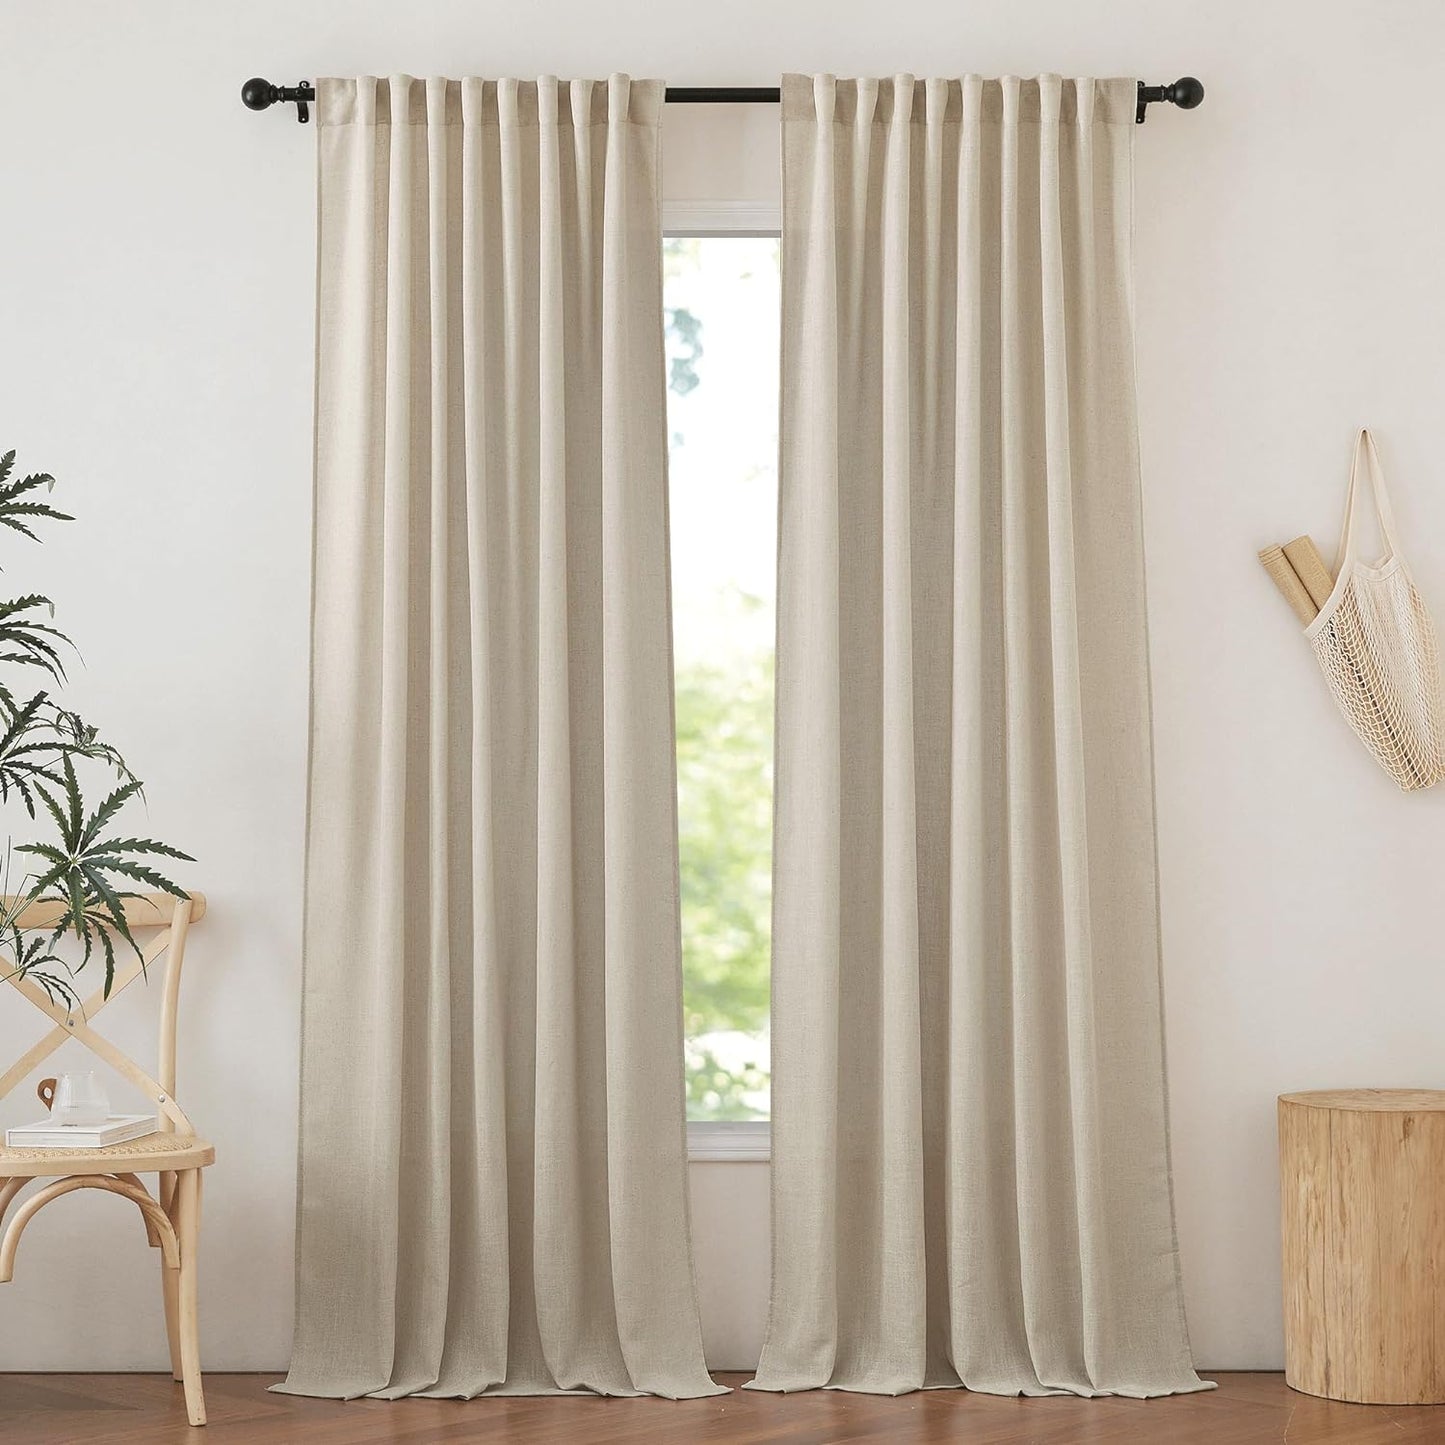 NICETOWN White Curtains Sheer - Semi Sheer Window Covering, Light & Airy Privacy Rod Pocket Back Tab Pinche Pleated Drapes for Bedroom Living Room Patio Glass Door, 52 X 63 Inches Long, Set of 2  NICETOWN Taupe W52 X L95 